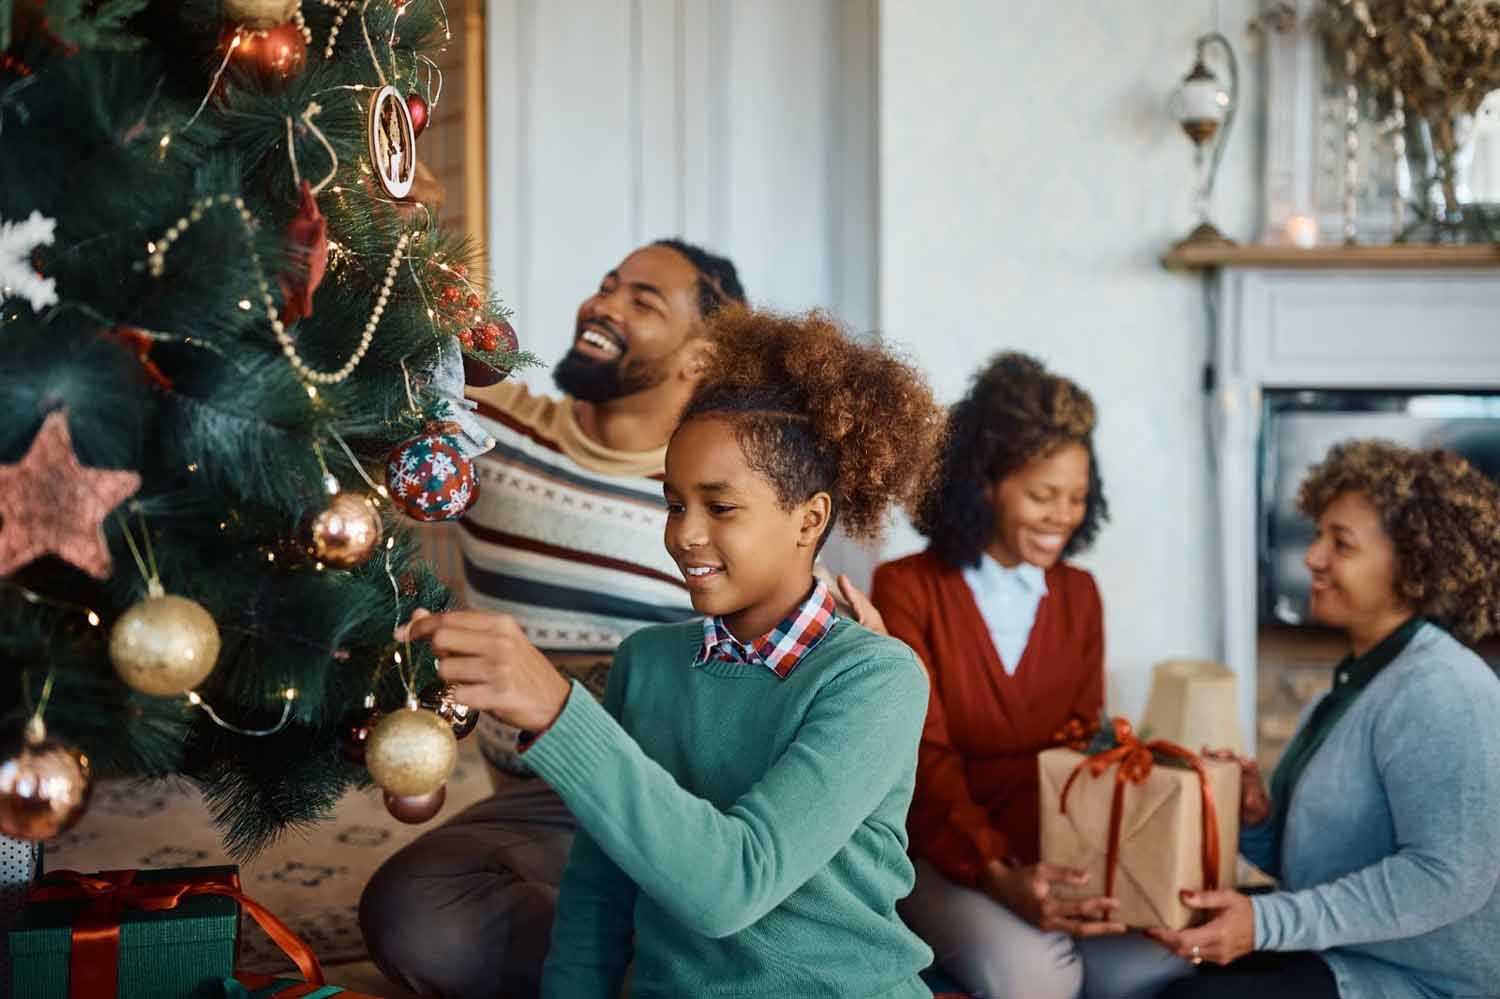 Happy family smiling and working together to decorate the Christmas tree and place wrapped gifts under the tree. The tree is placed in a safe place away from the fireplace.